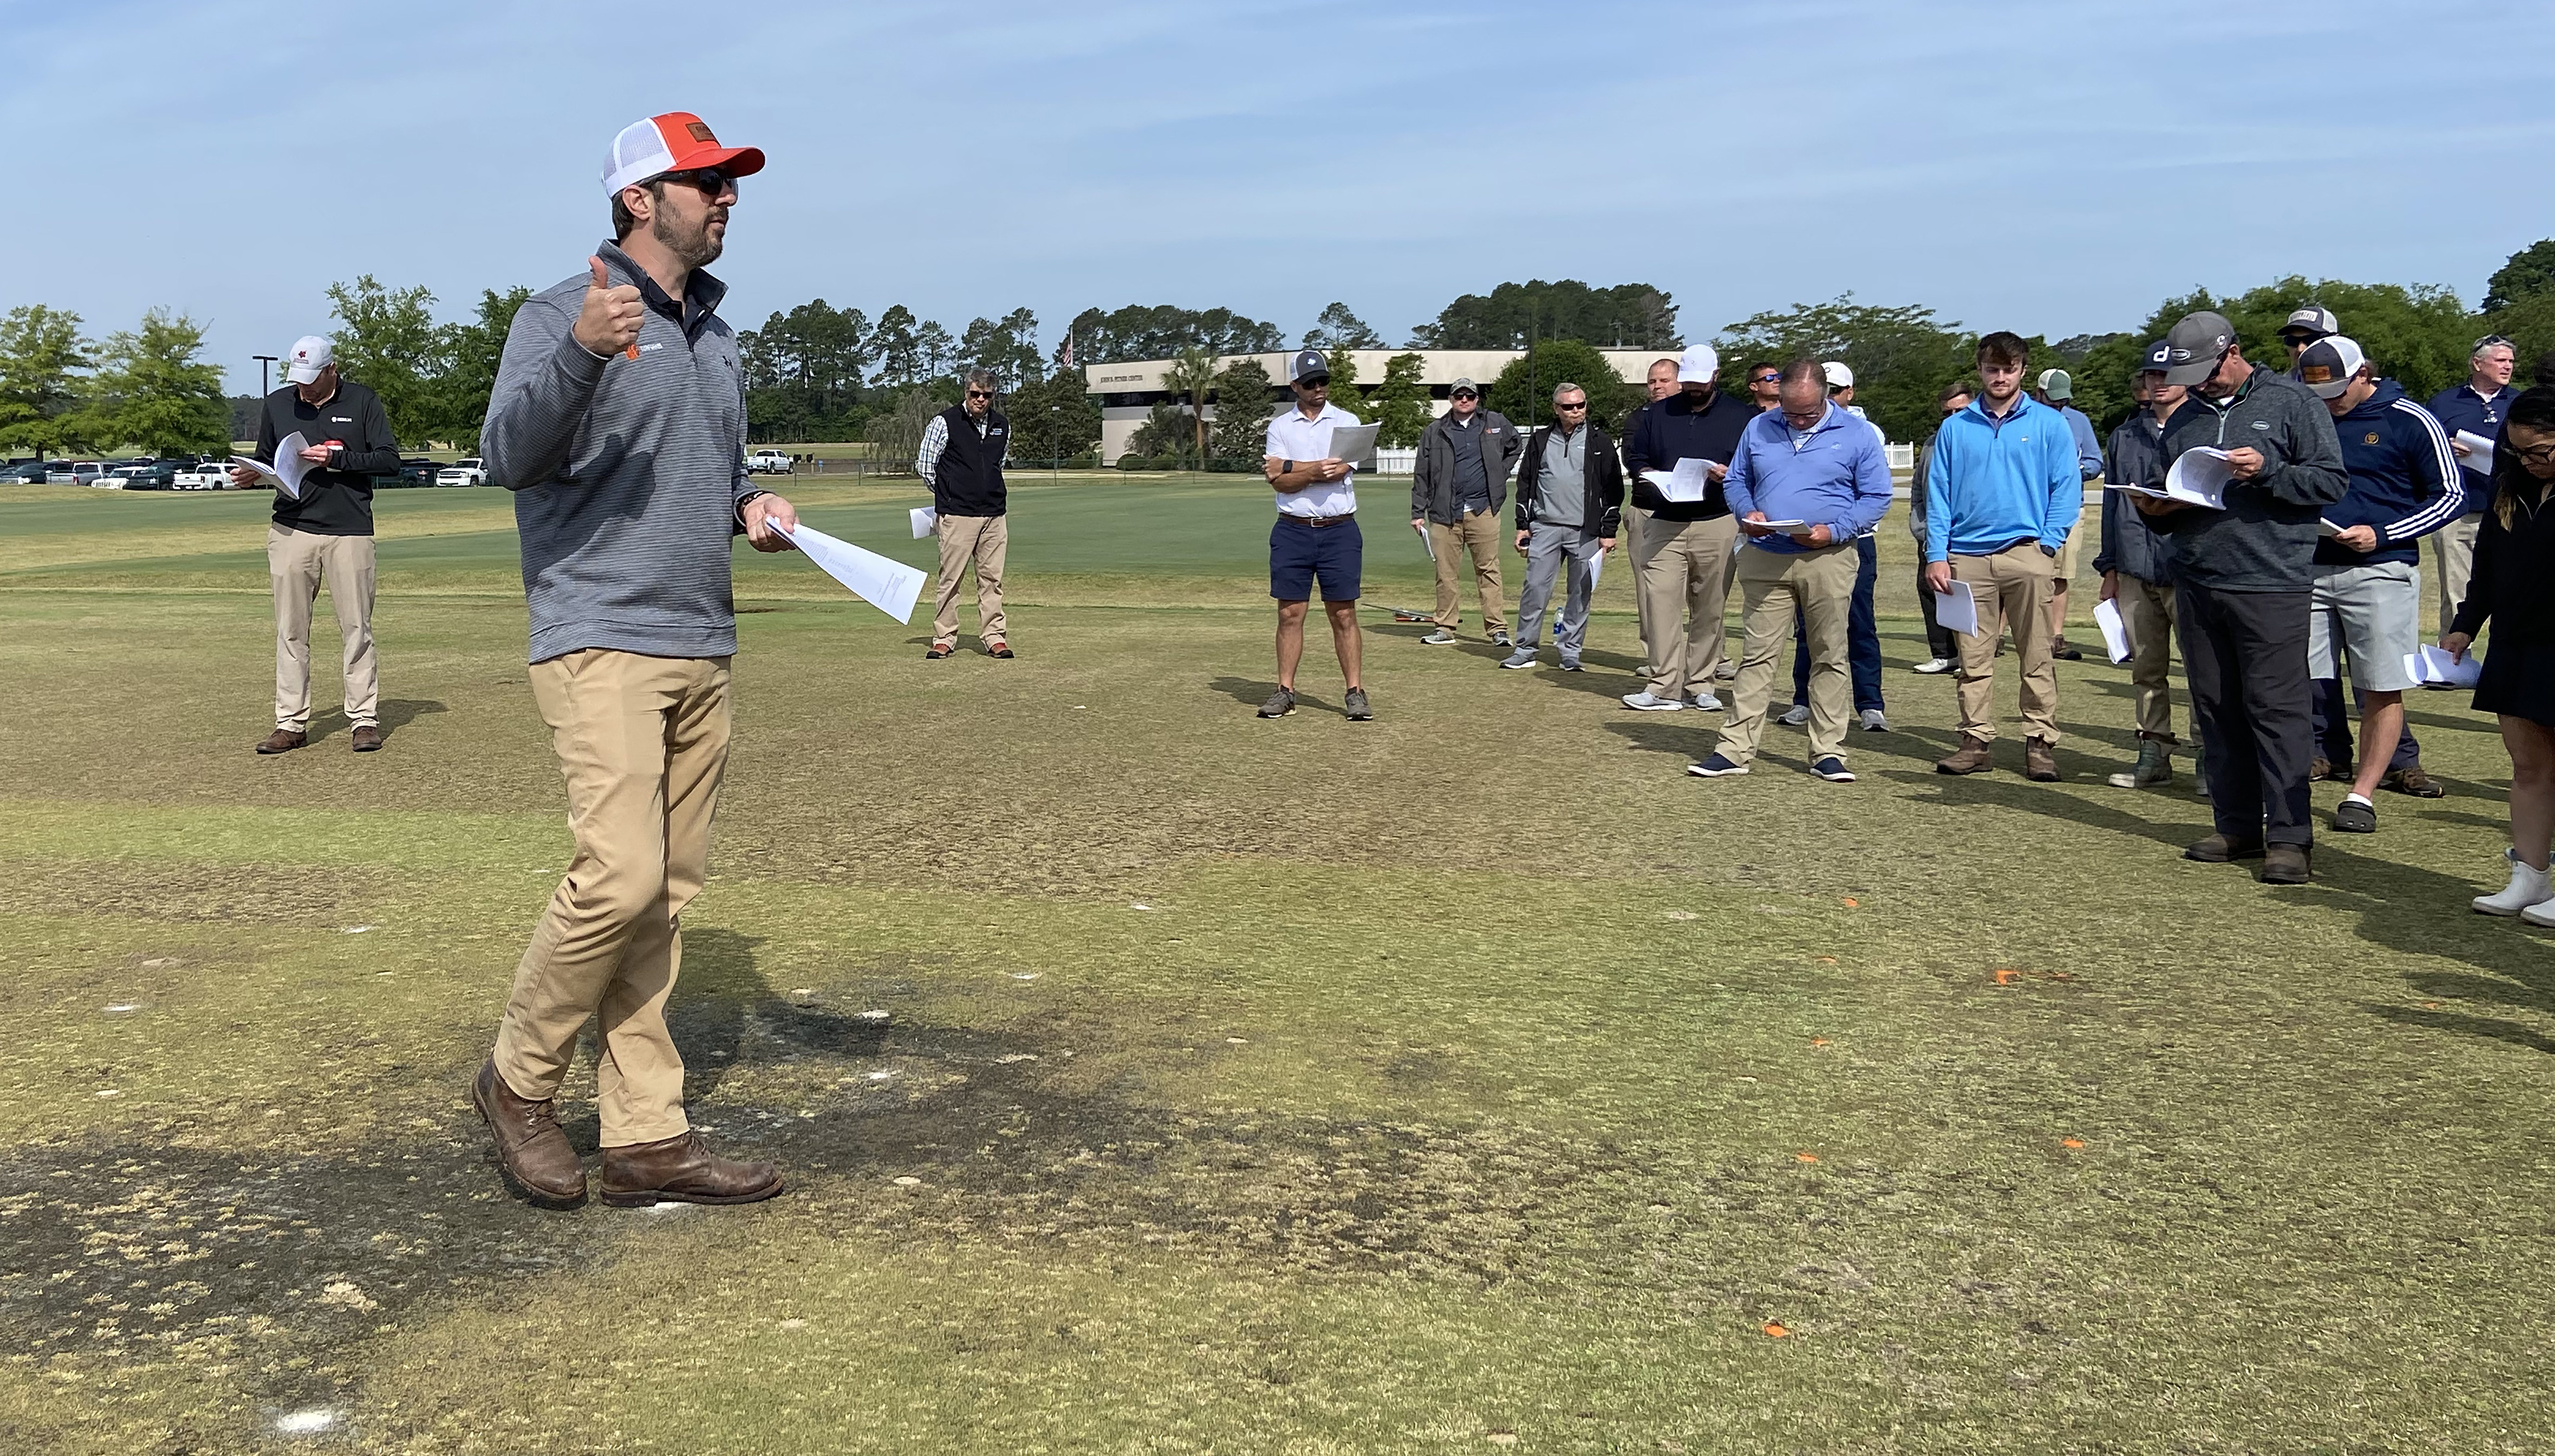 Joseph Roberts, turfgrass pathologist and Clemson Extension nematology specialist, talks about turfgrass research conducted at the Pee Dee REC.